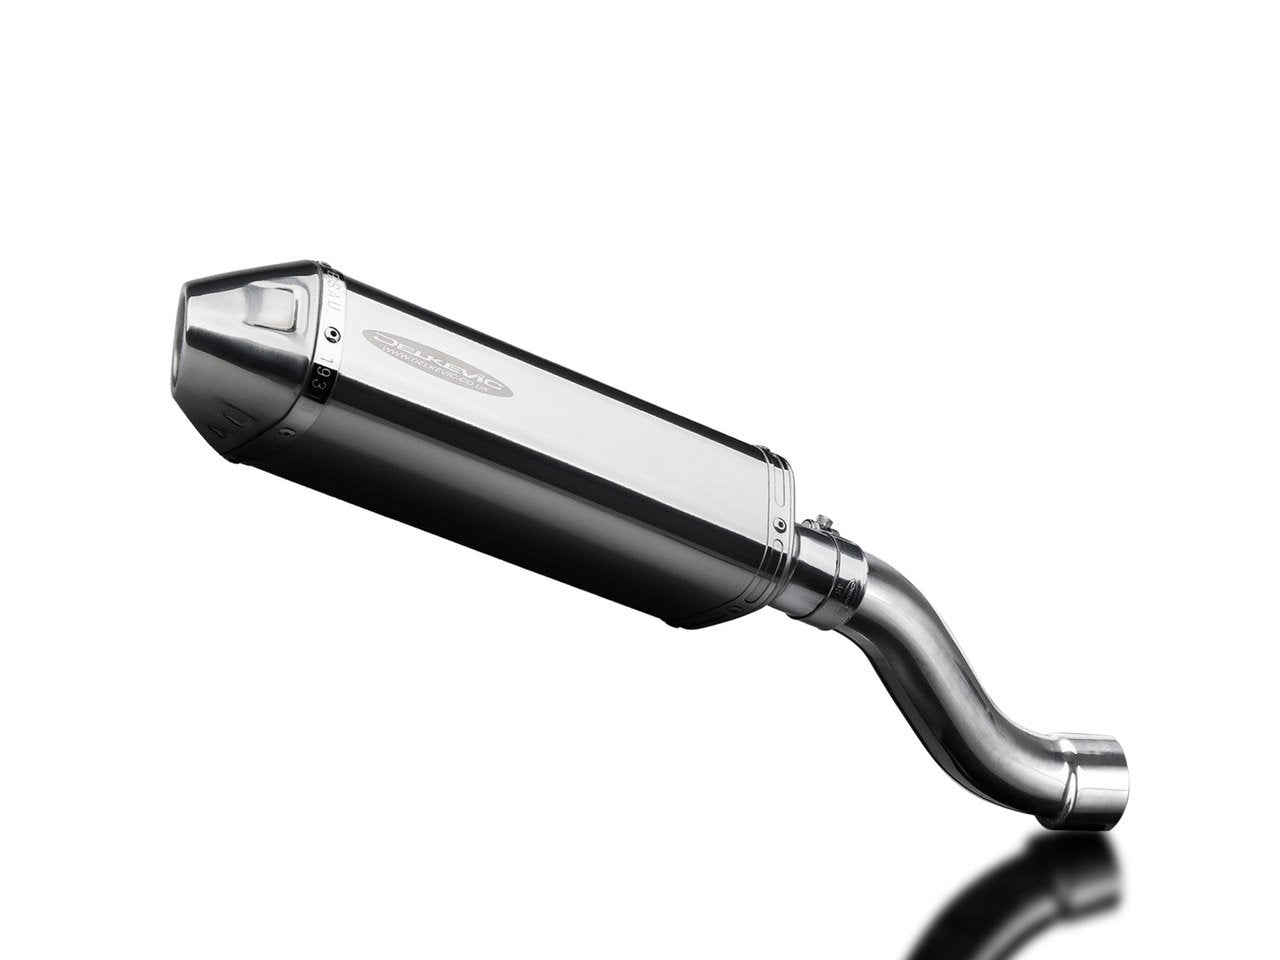 DELKEVIC Ducati Monster 821 / 1200 Slip-on Exhaust 13" Tri-Oval